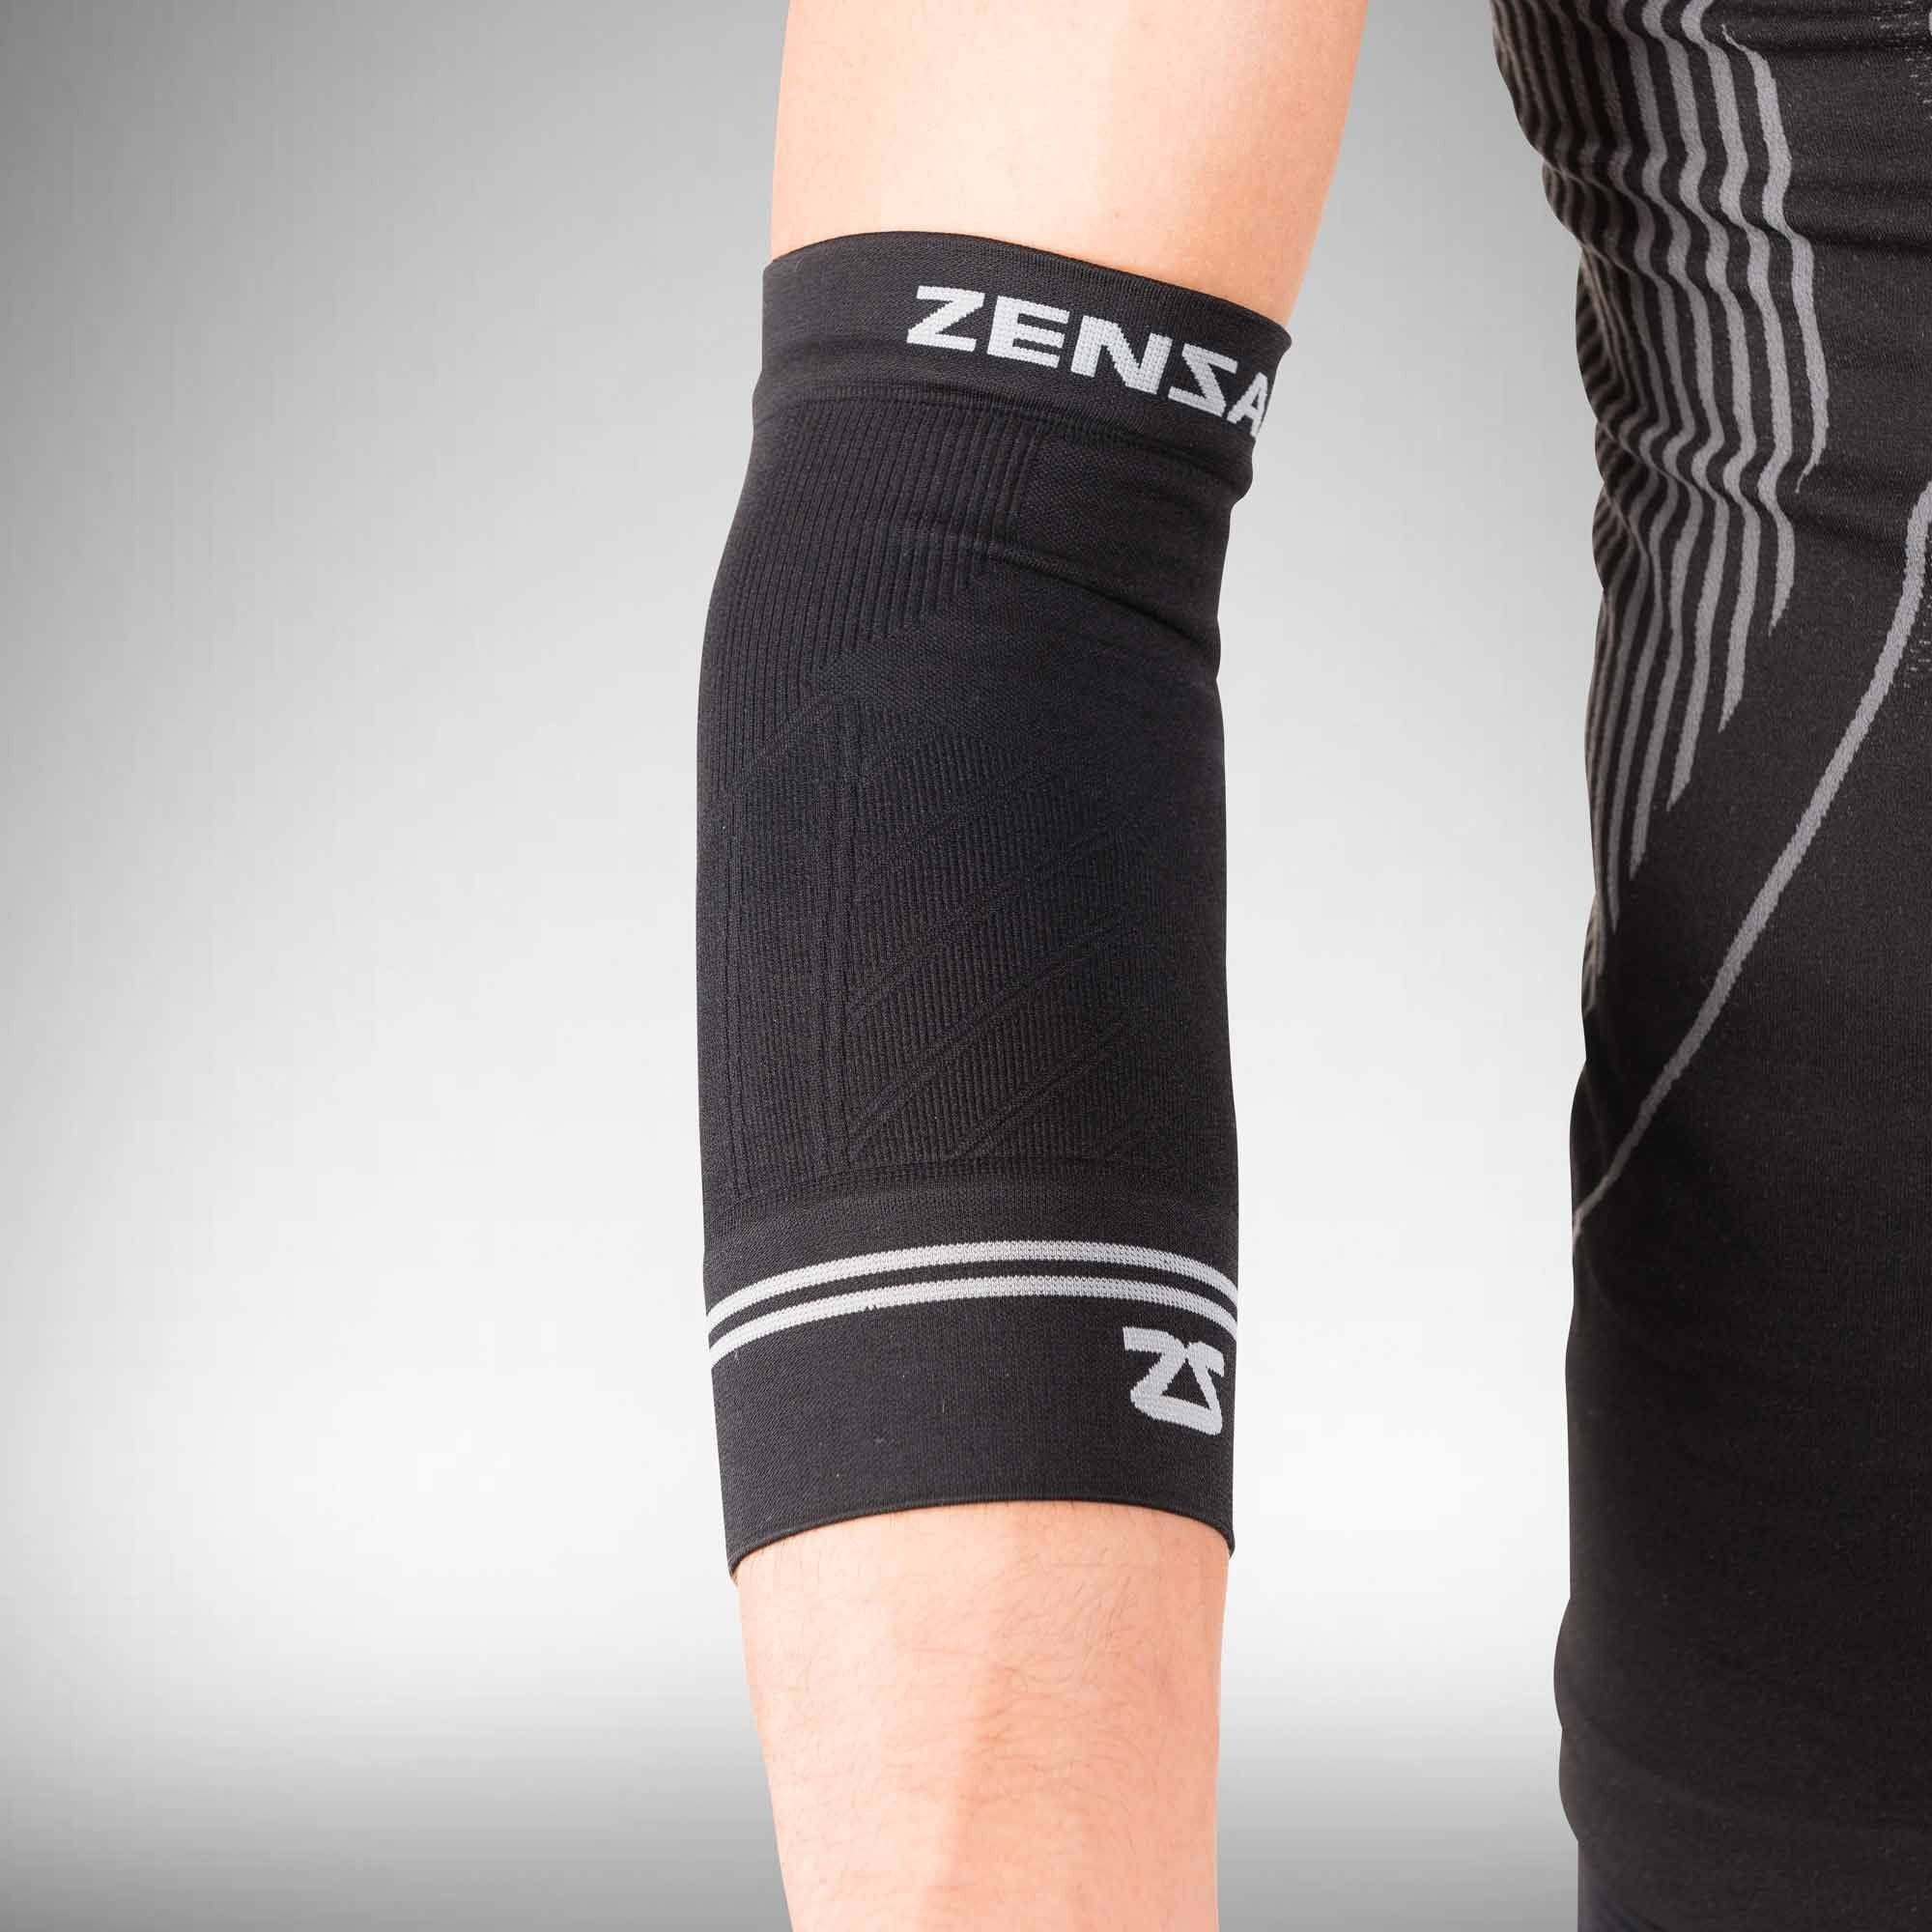  ZOFORE SPORT Tennis Elbow Brace With Compression Pad (2-Count)  - Effective Pain Relief for Tennis & Golfer's Elbow for Men & Women :  Health & Household